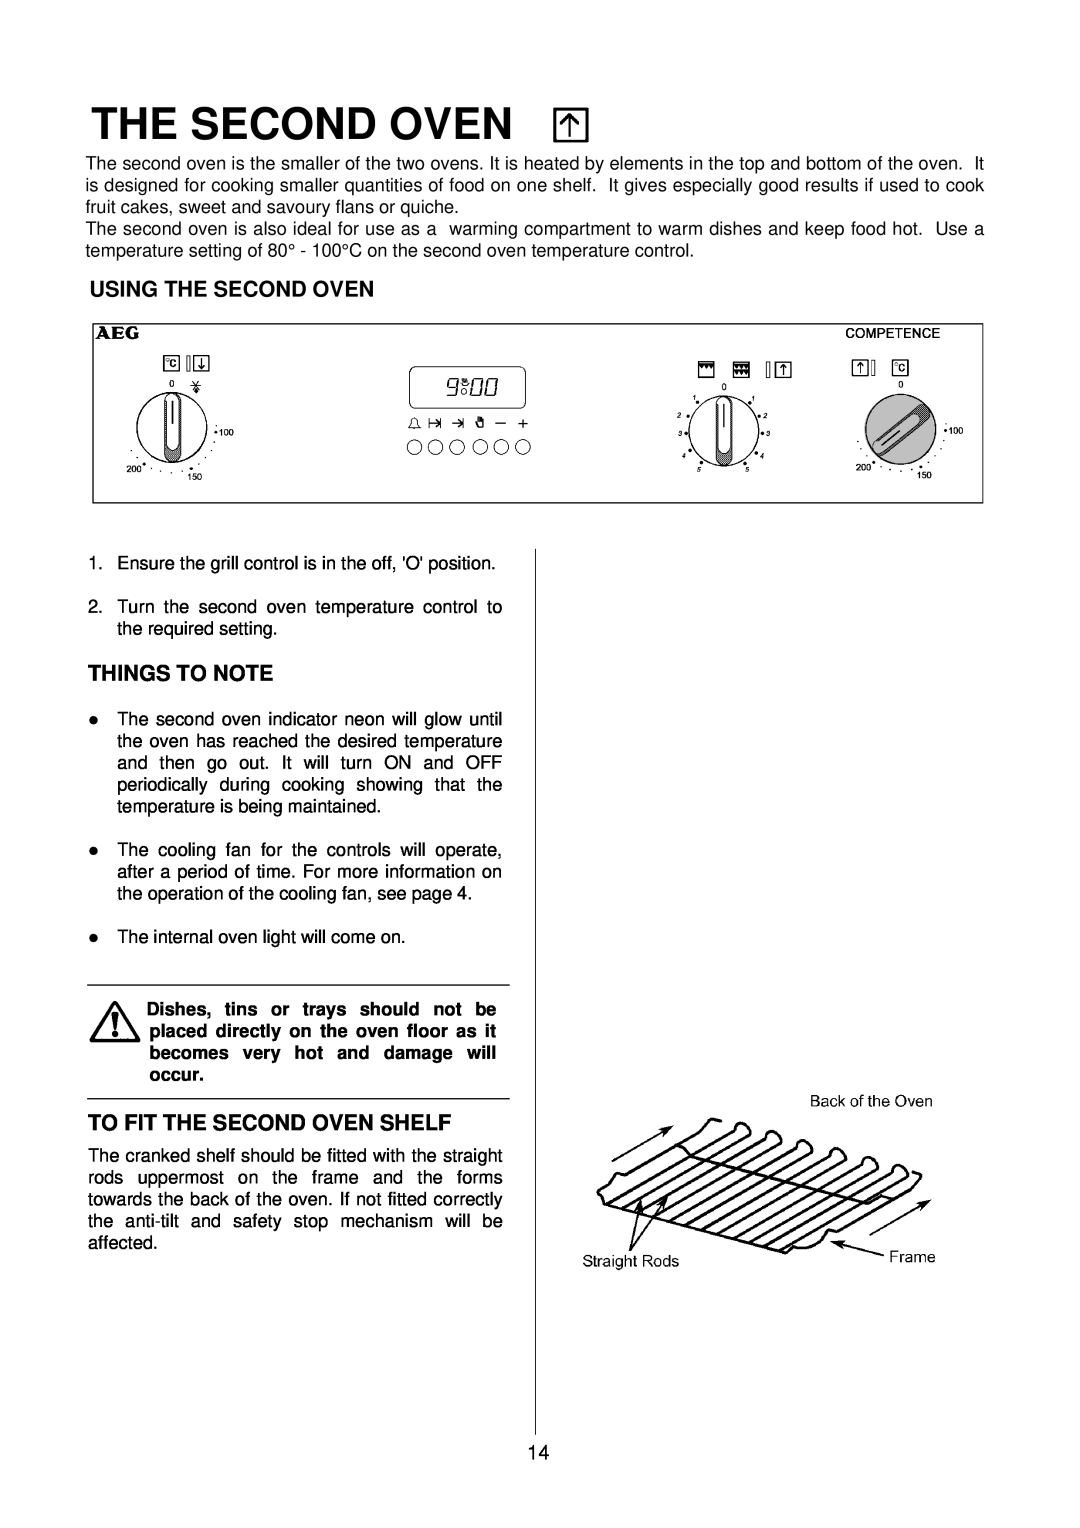 Electrolux D2160 installation instructions Using The Second Oven, Things To Note, To Fit The Second Oven Shelf 